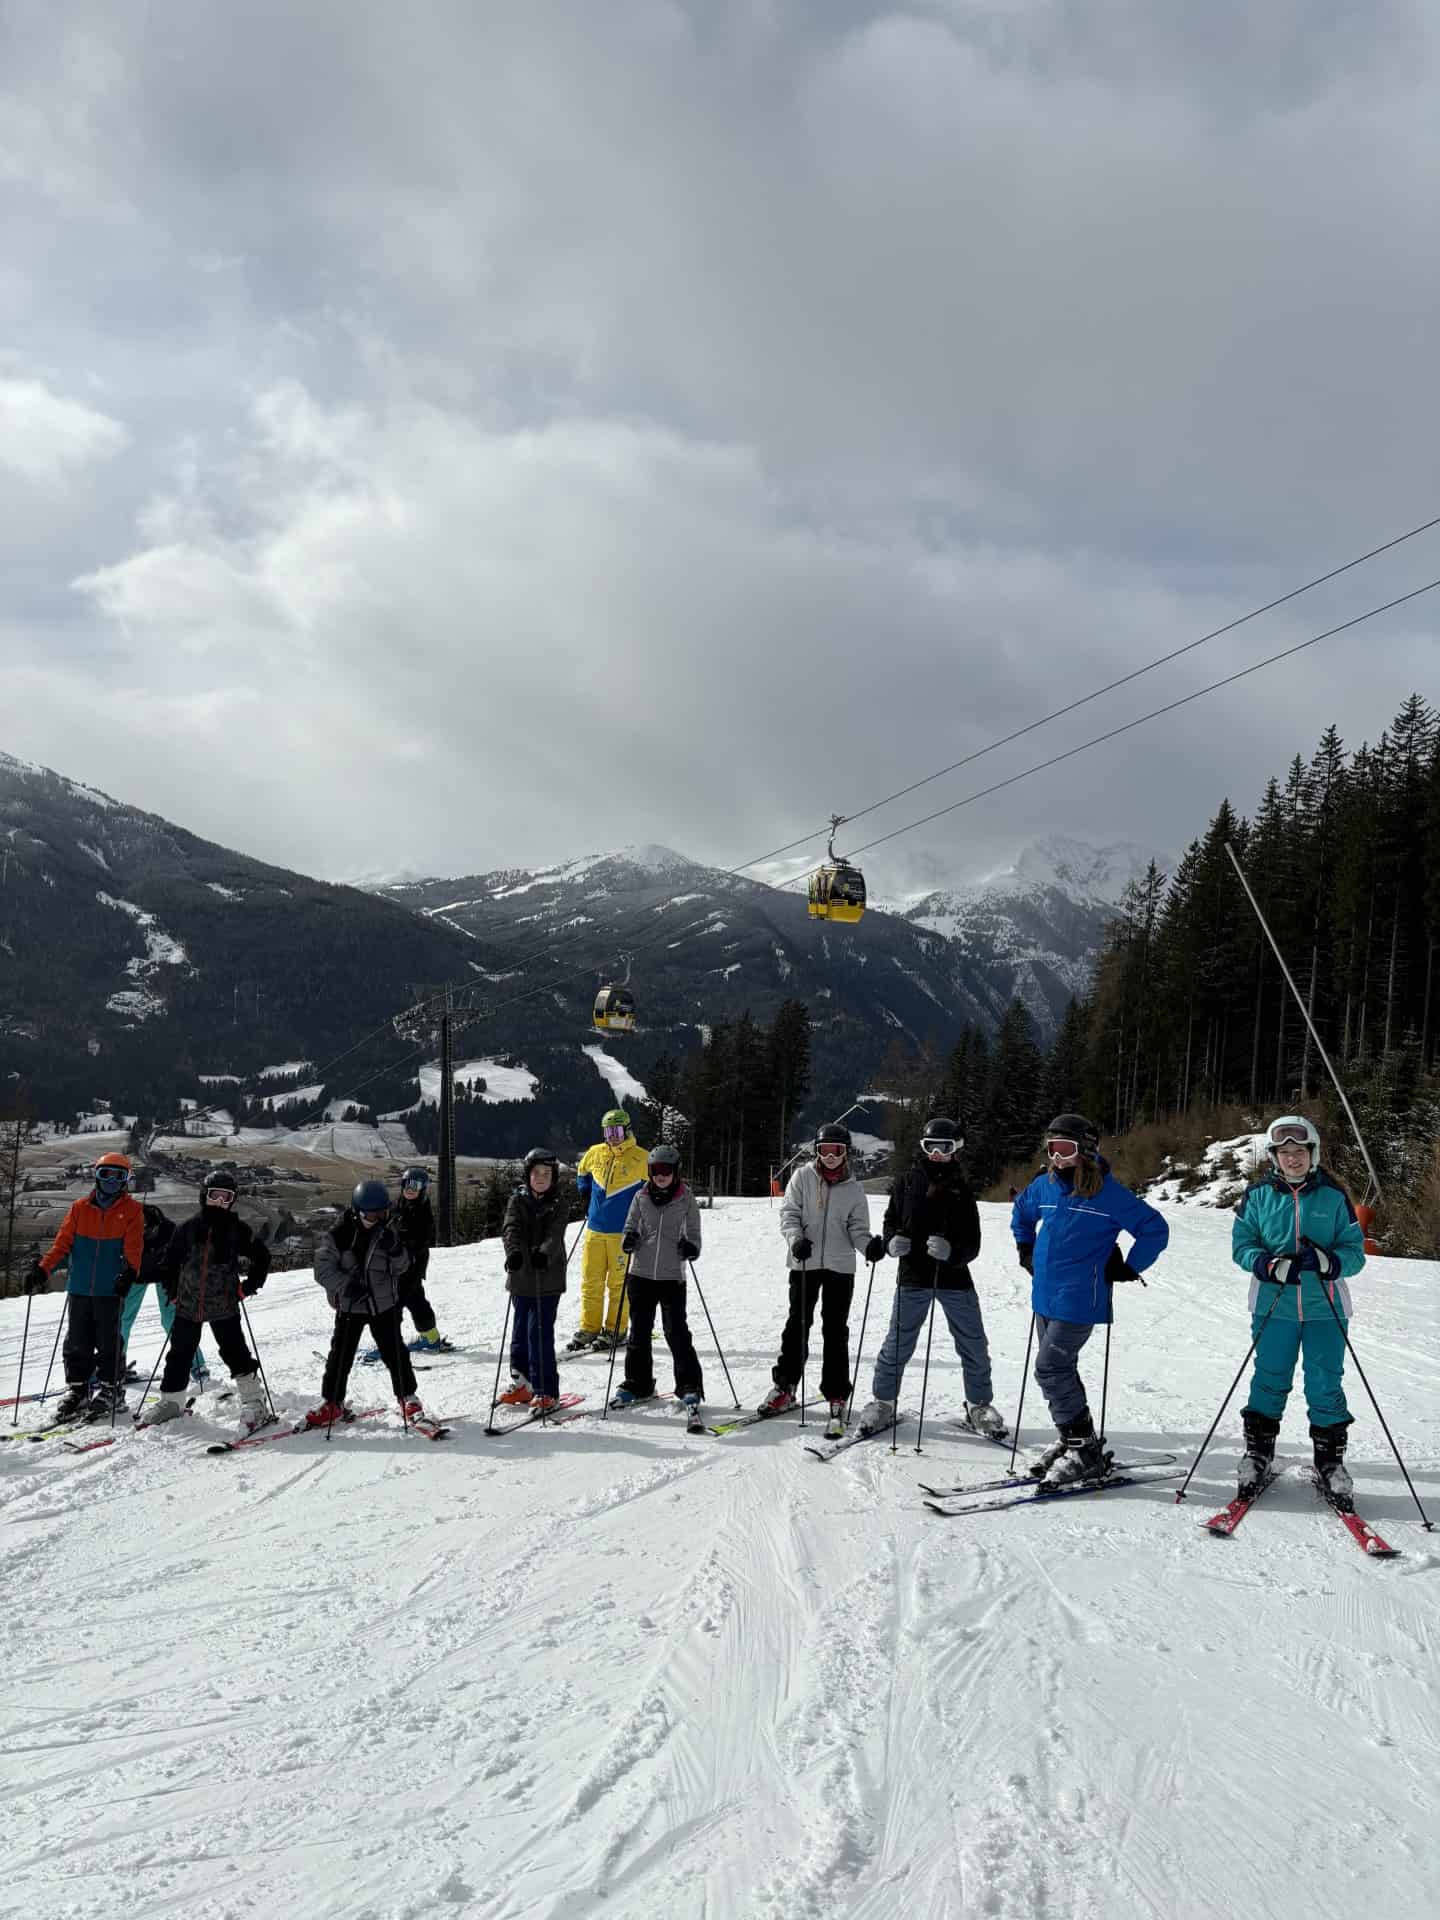 Students from Priestnall School stand in a line on a ski slope in Austria.